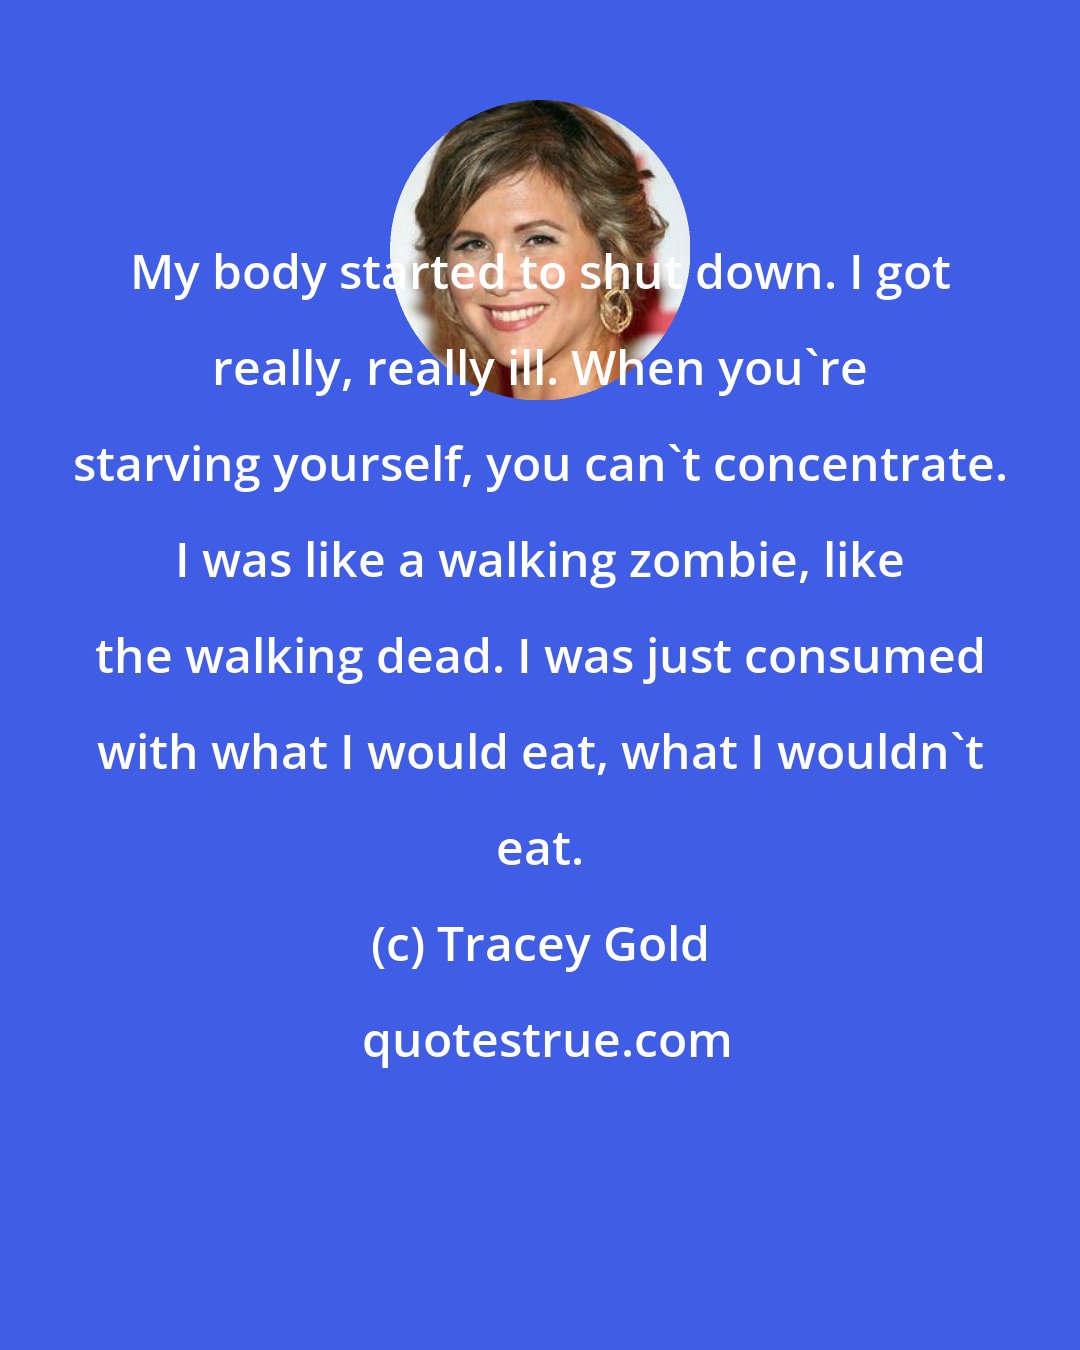 Tracey Gold: My body started to shut down. I got really, really ill. When you're starving yourself, you can't concentrate. I was like a walking zombie, like the walking dead. I was just consumed with what I would eat, what I wouldn't eat.